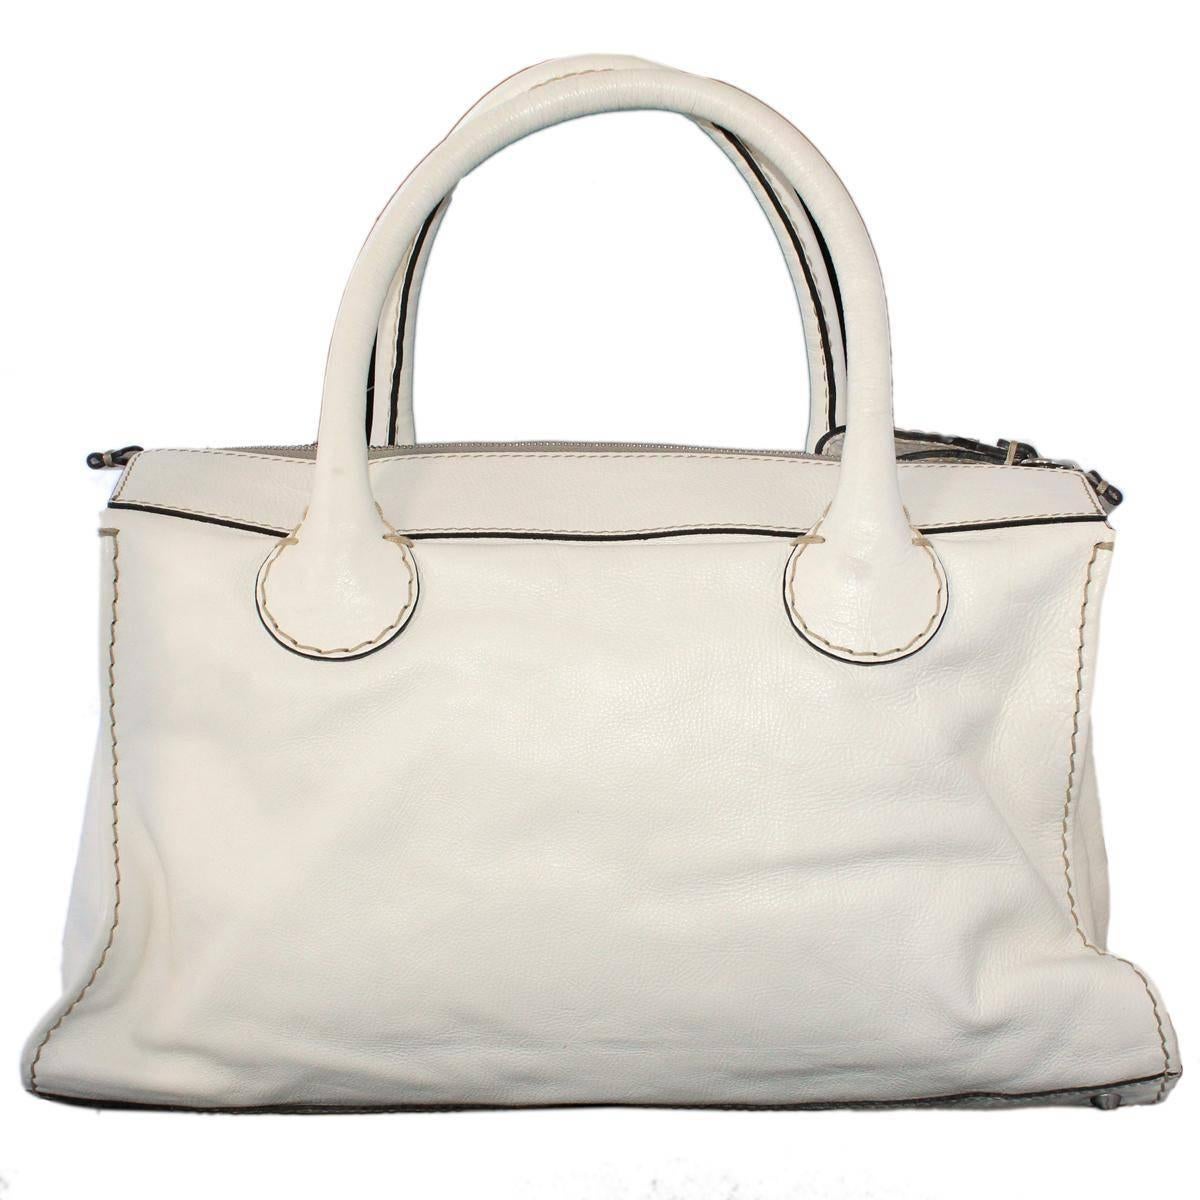 Beautiful and classy large bag
Leather
White cream color
Two handles
External pocket
Zip closure
Internal zip pocket
Textile internal
Cm 50 x 33 (19.3 x 12.9 inches)
Made in Italy
Worldwide express shipping included in the price